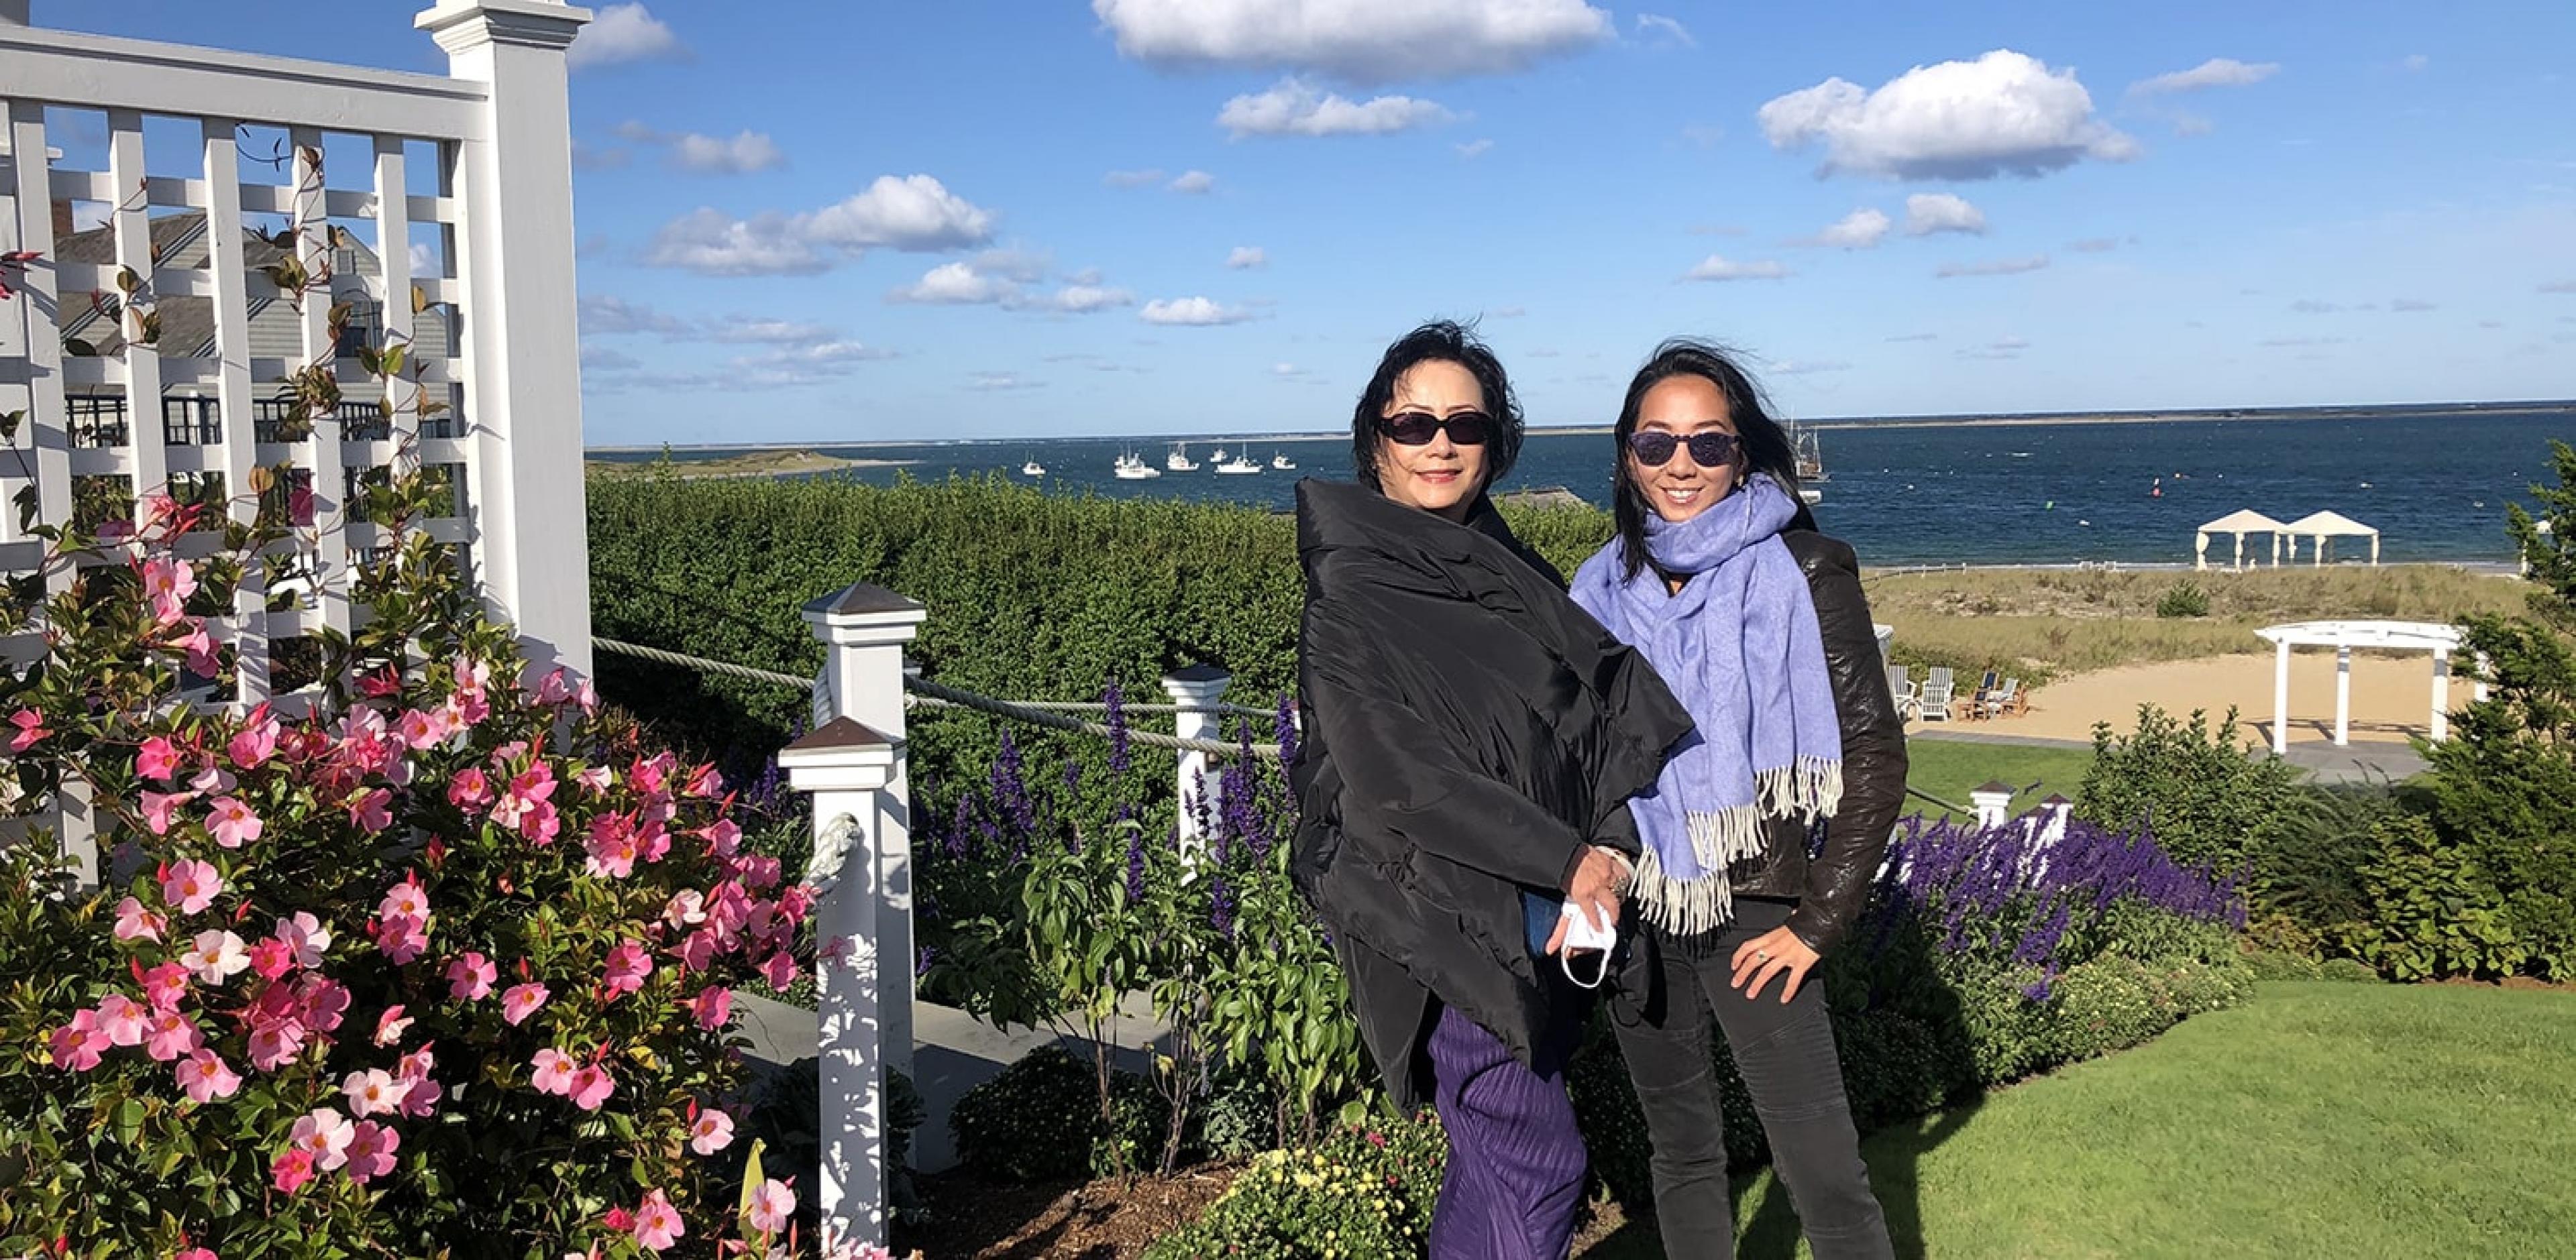 GPO Summer Travel Series: A Cape Cod Vacation